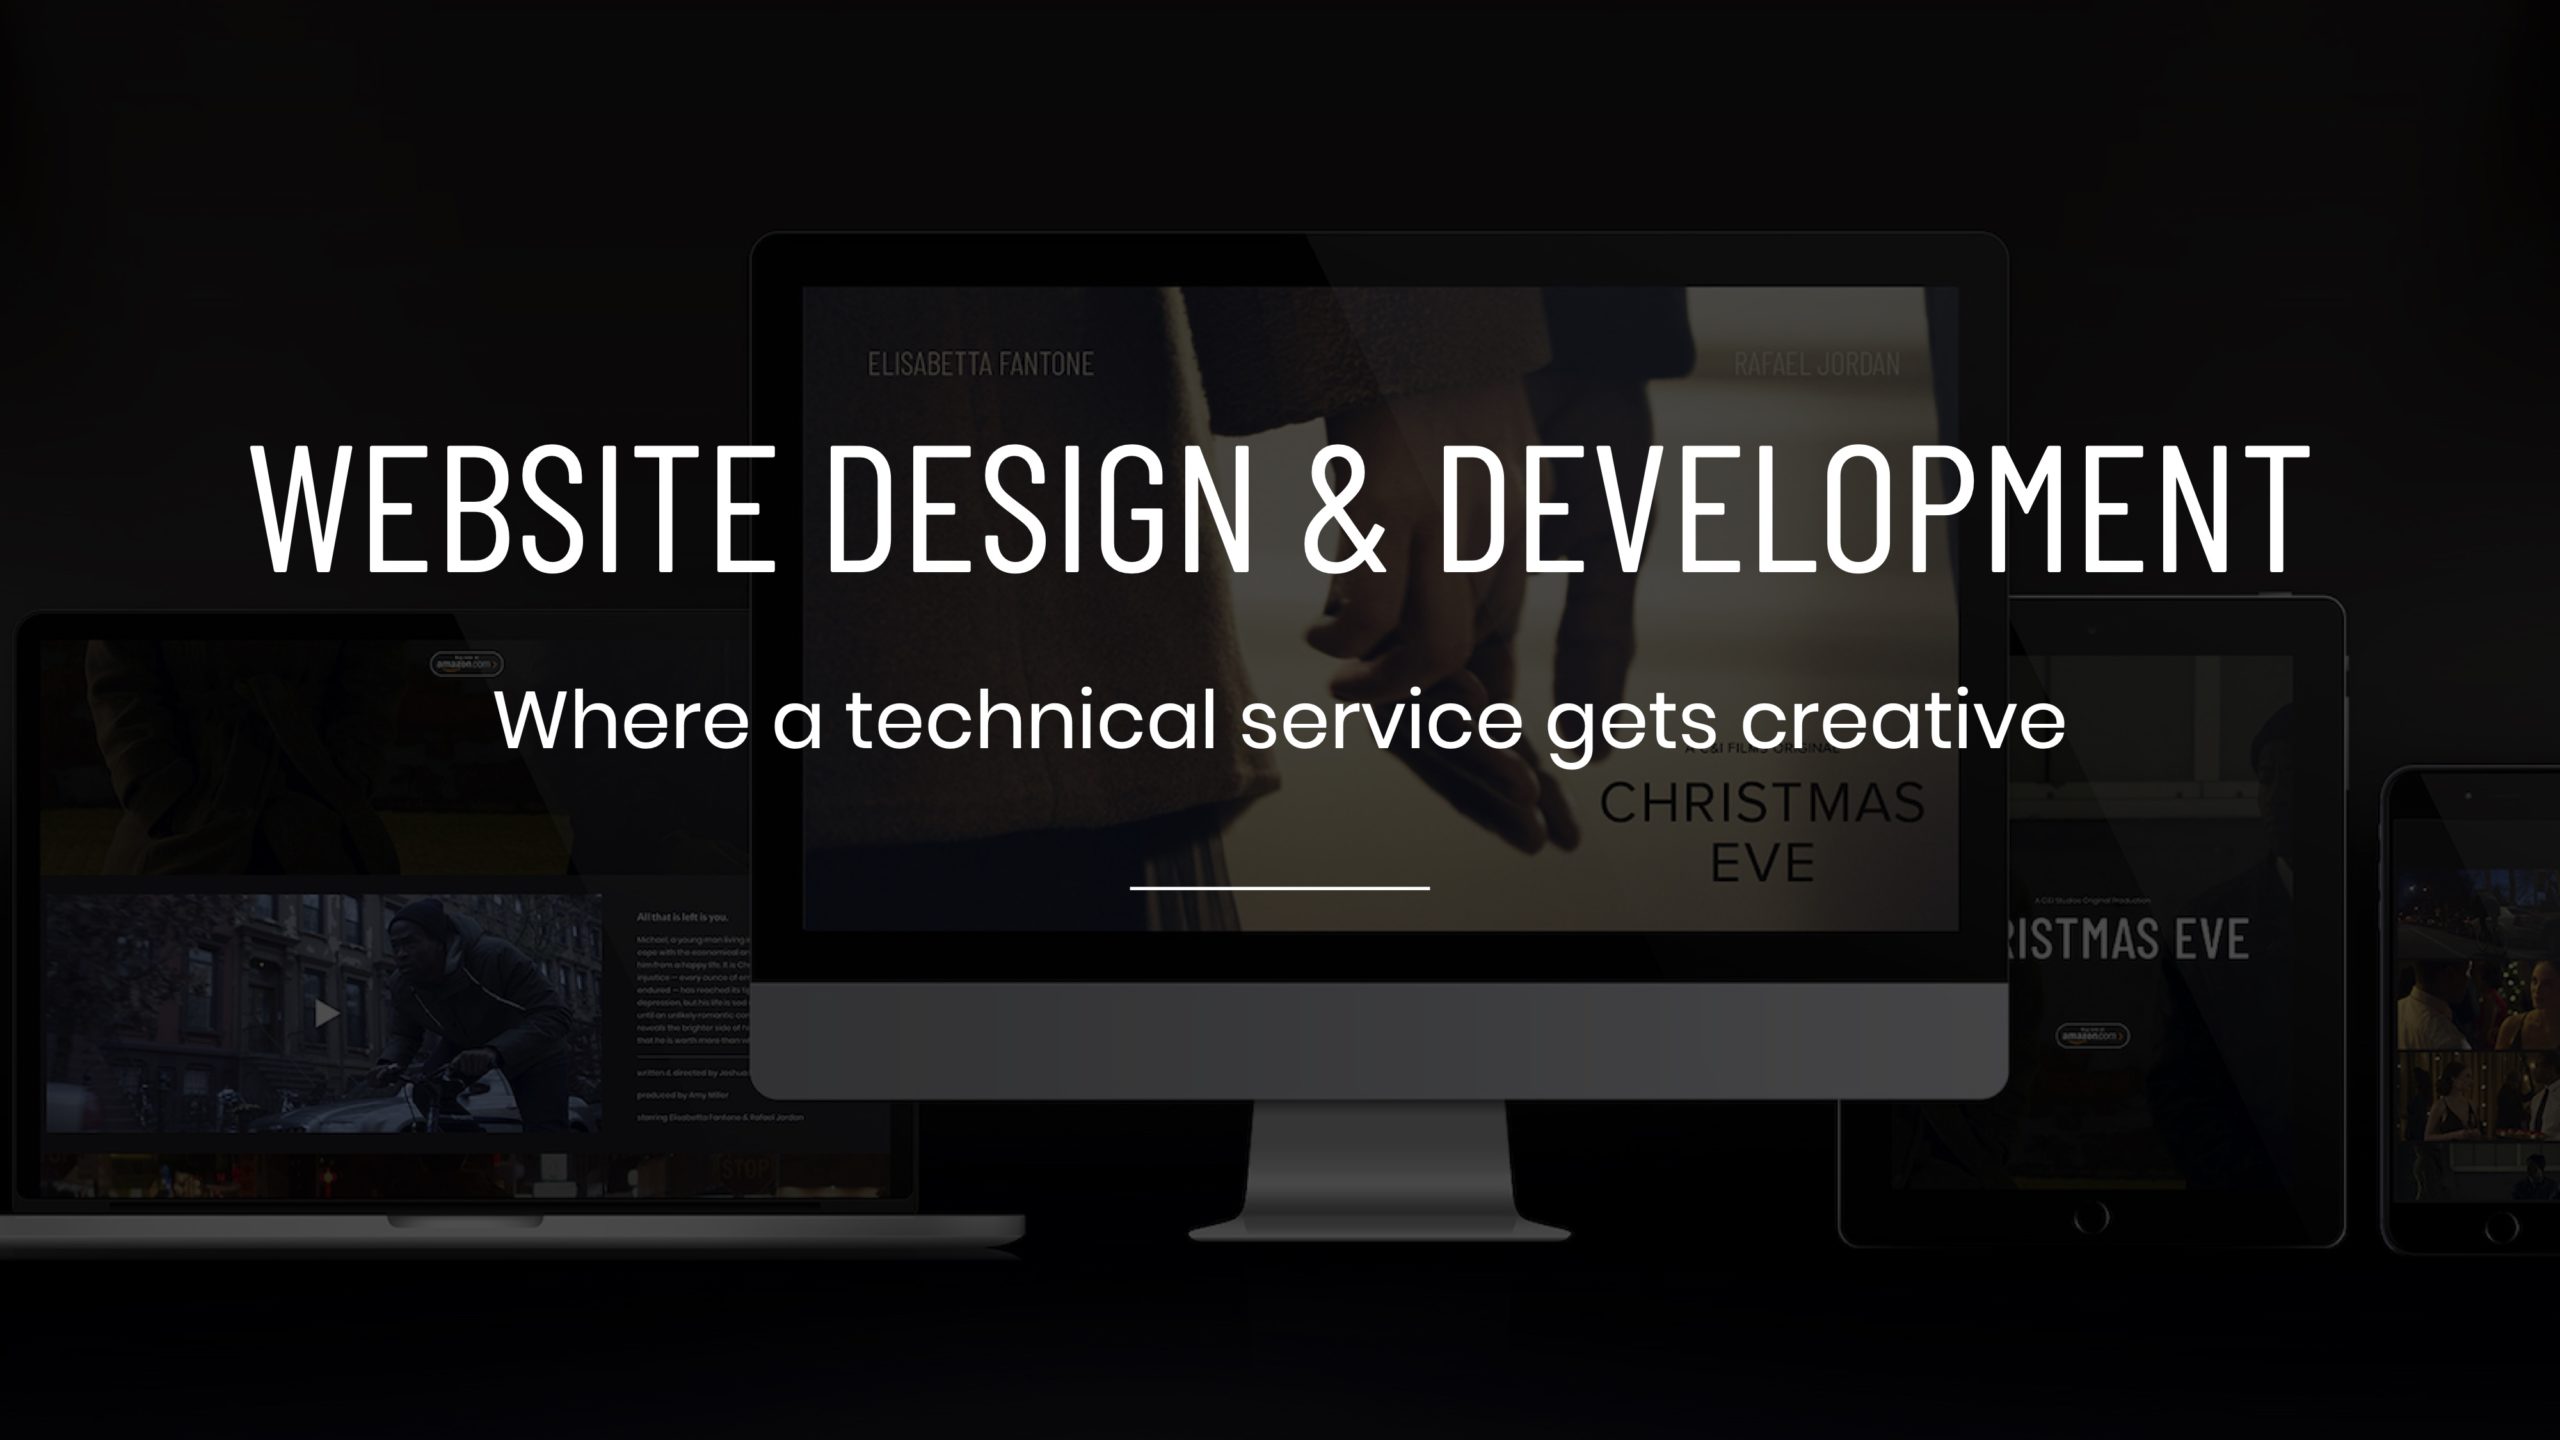 White Website Design and Development title Service Tile on a background showing various screen displays